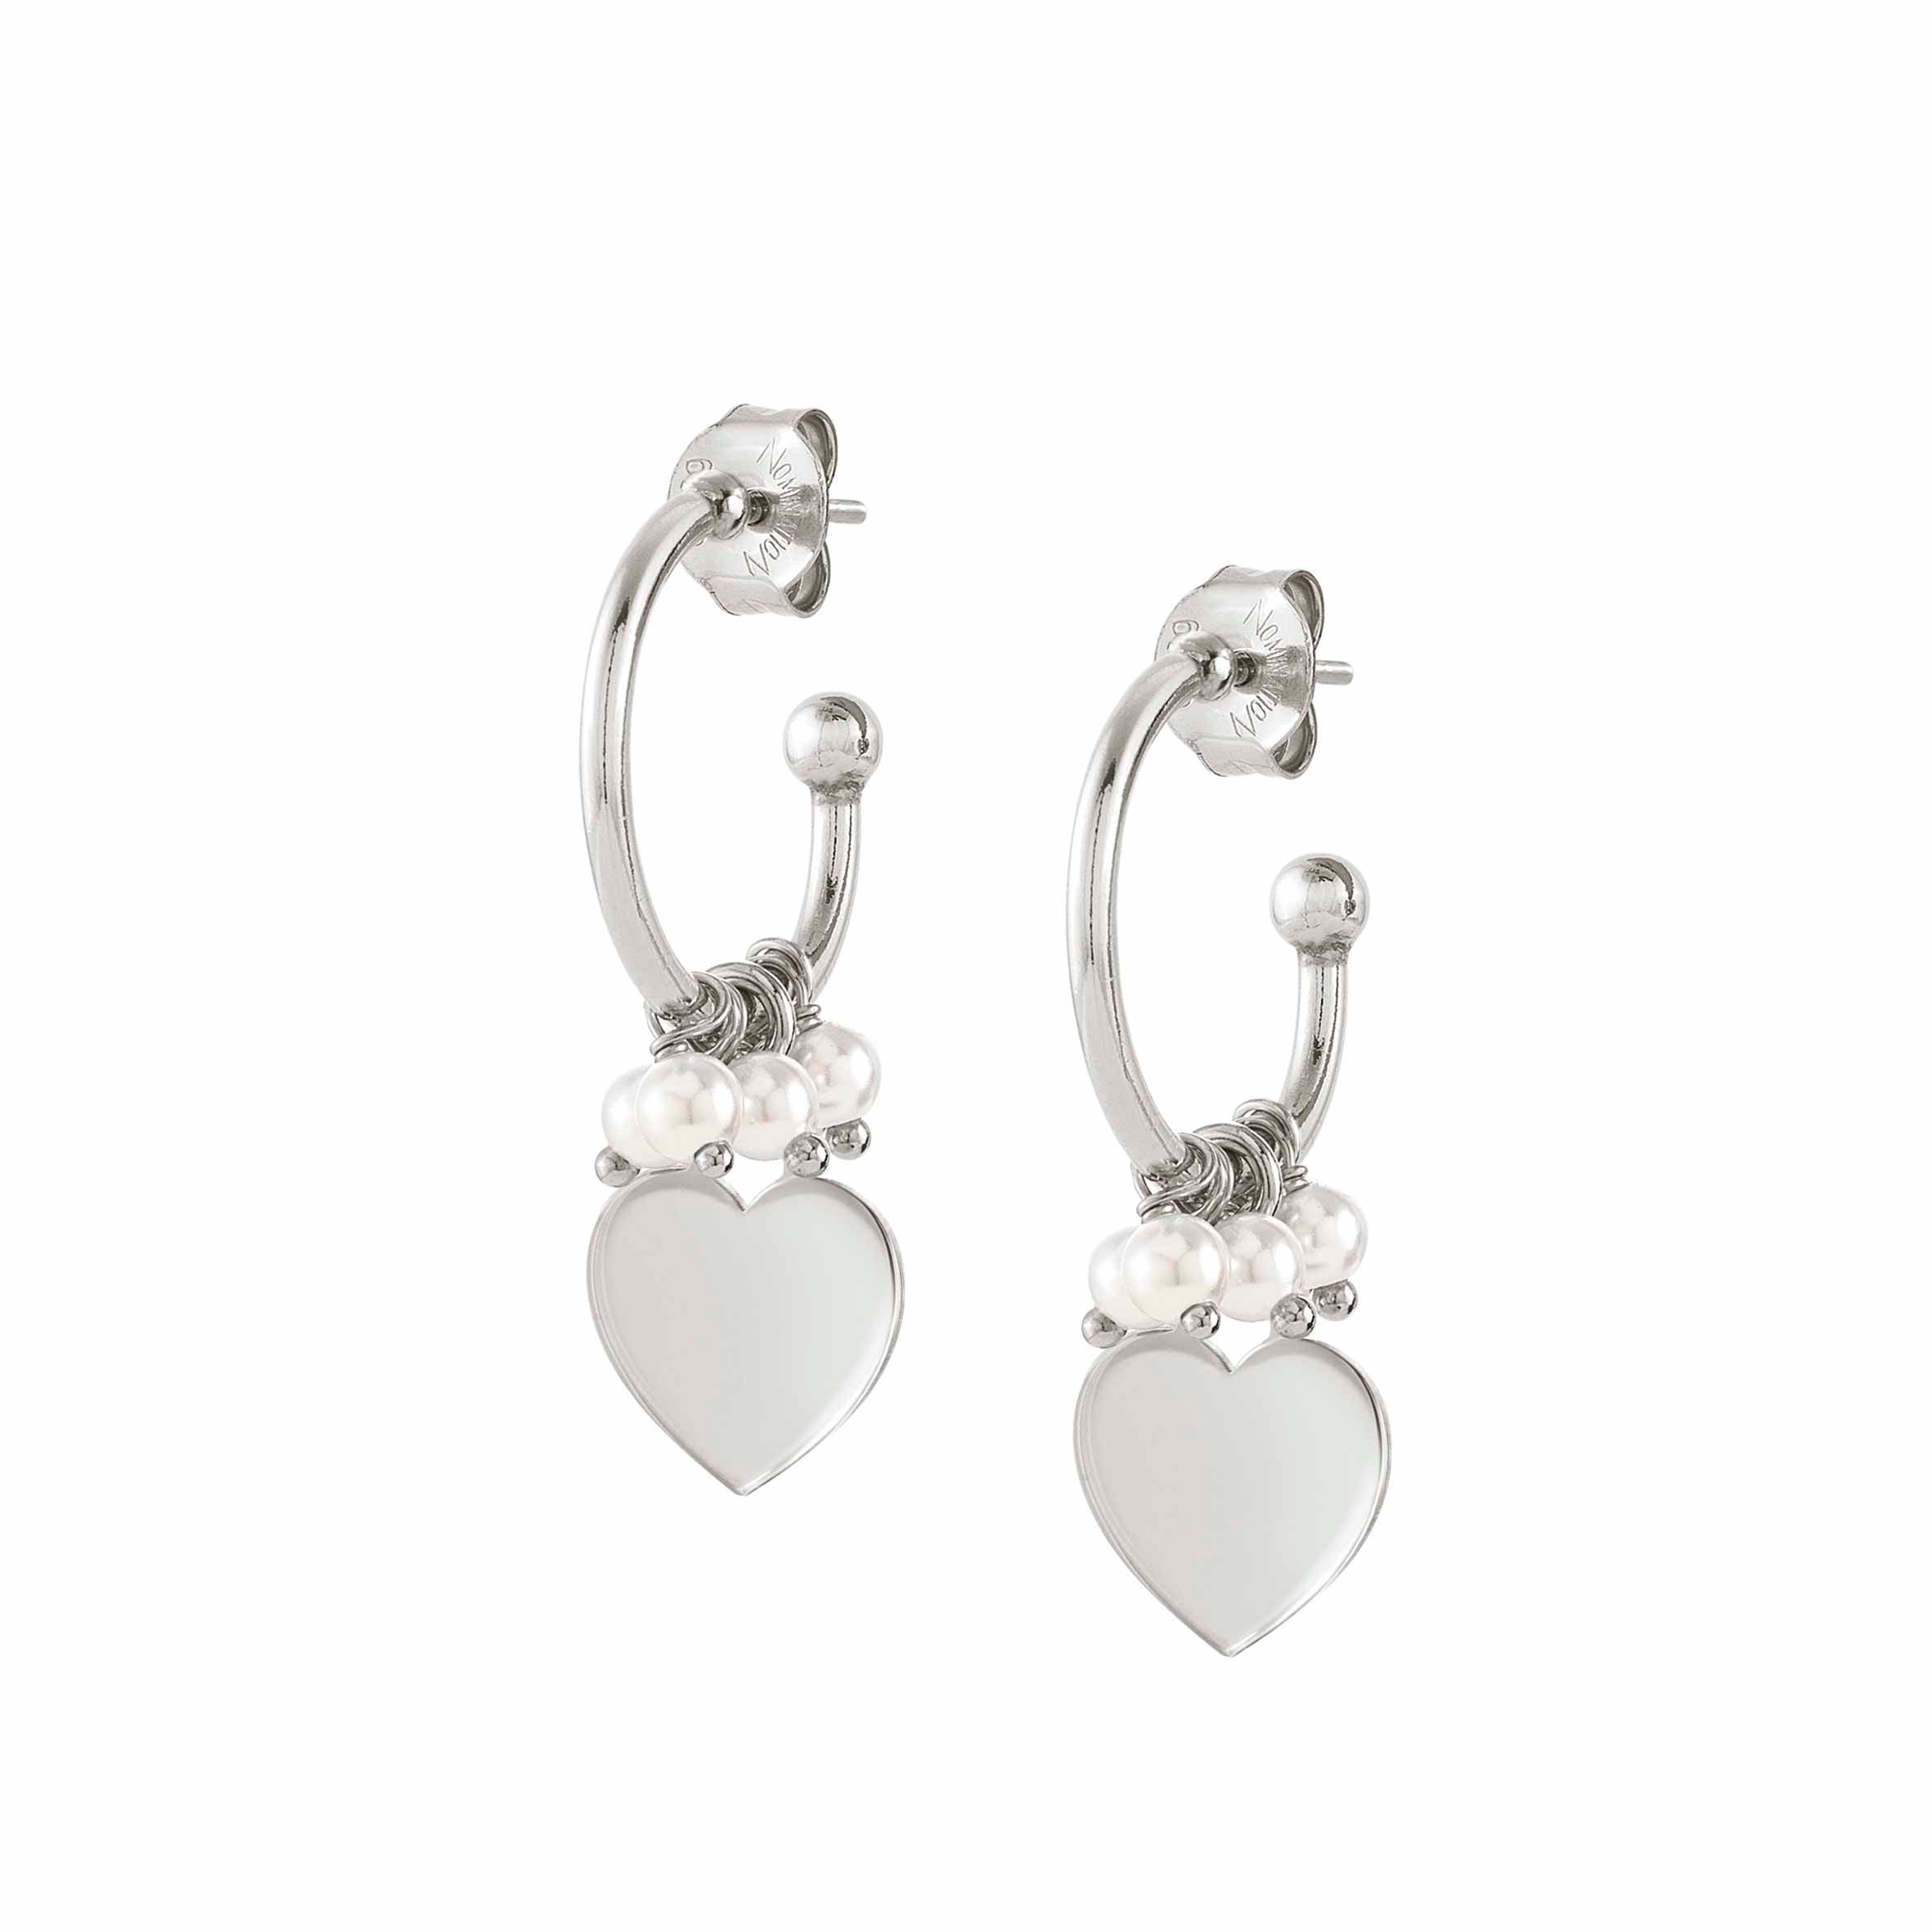 Nomination Melodie White Crystal Pearl Earrings 147713/001 Heart